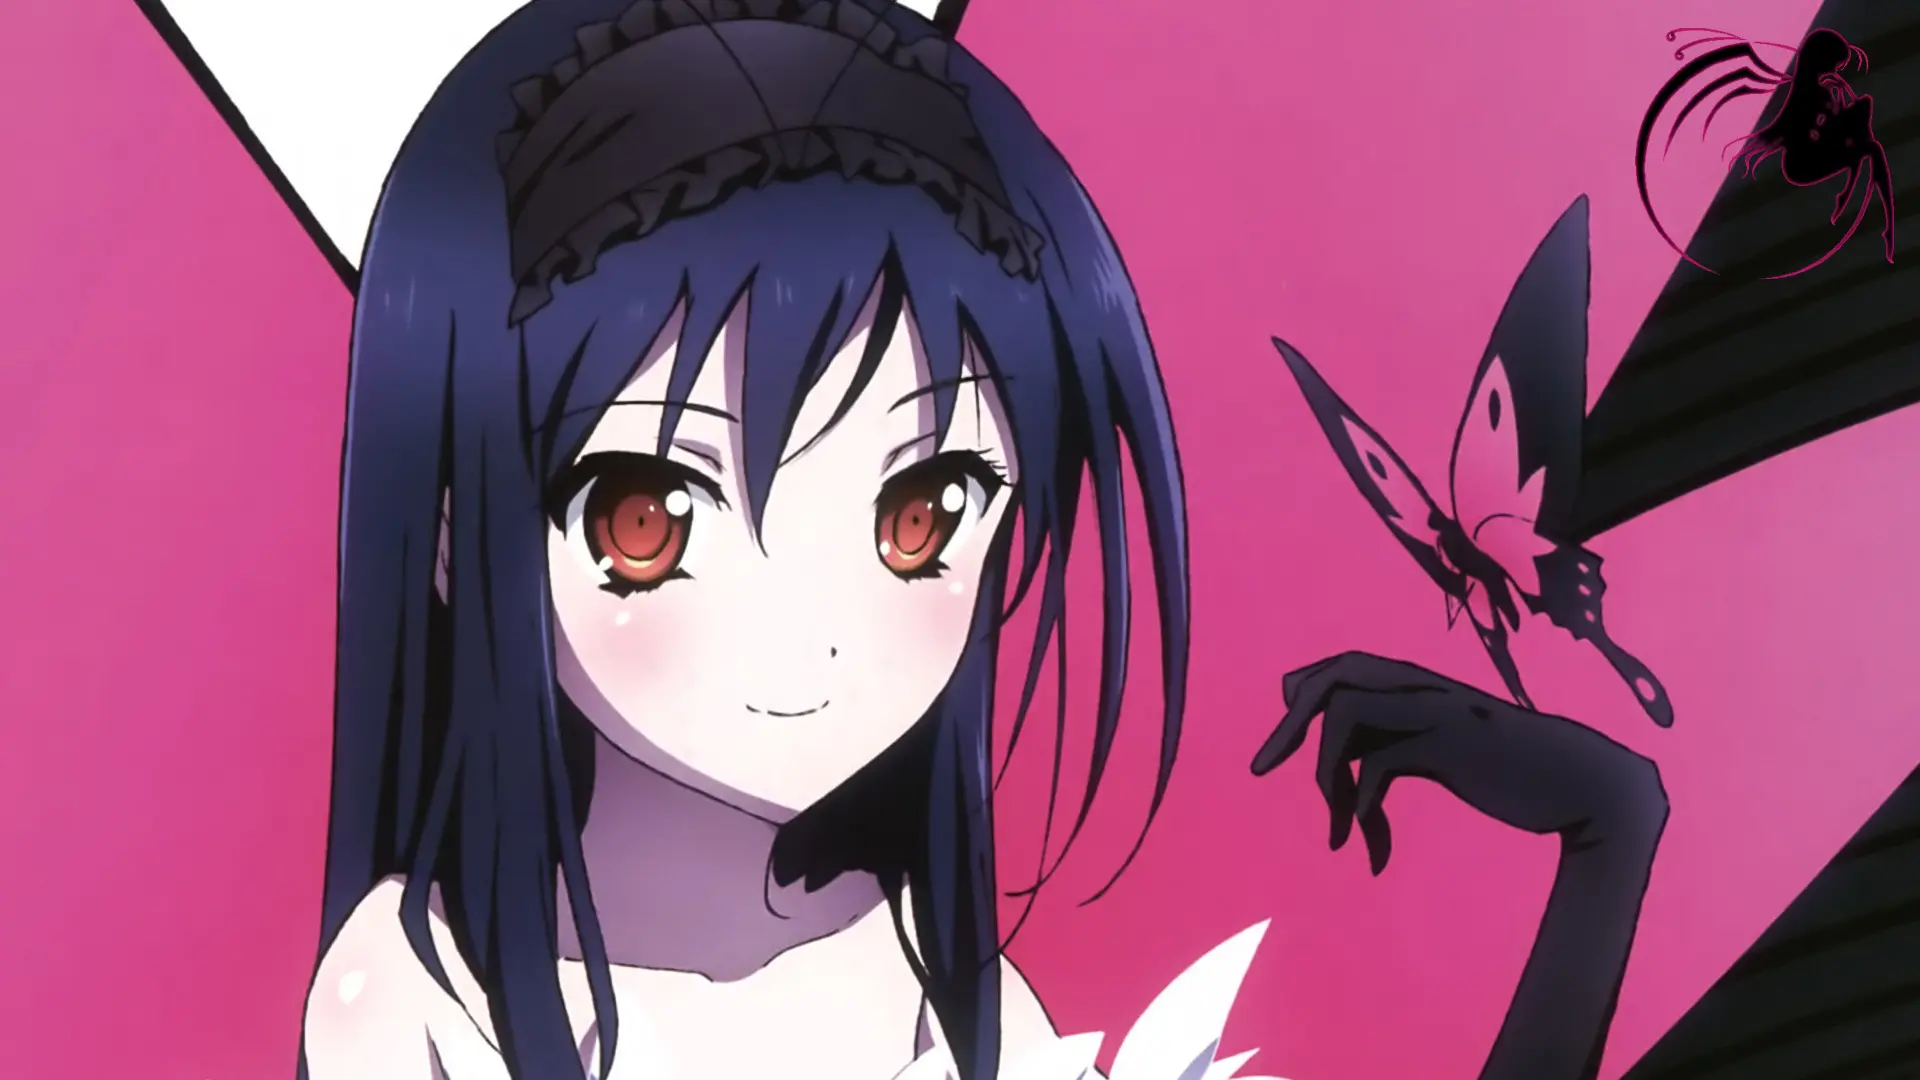 Anime Accel World wallpaper 4 | Background Image